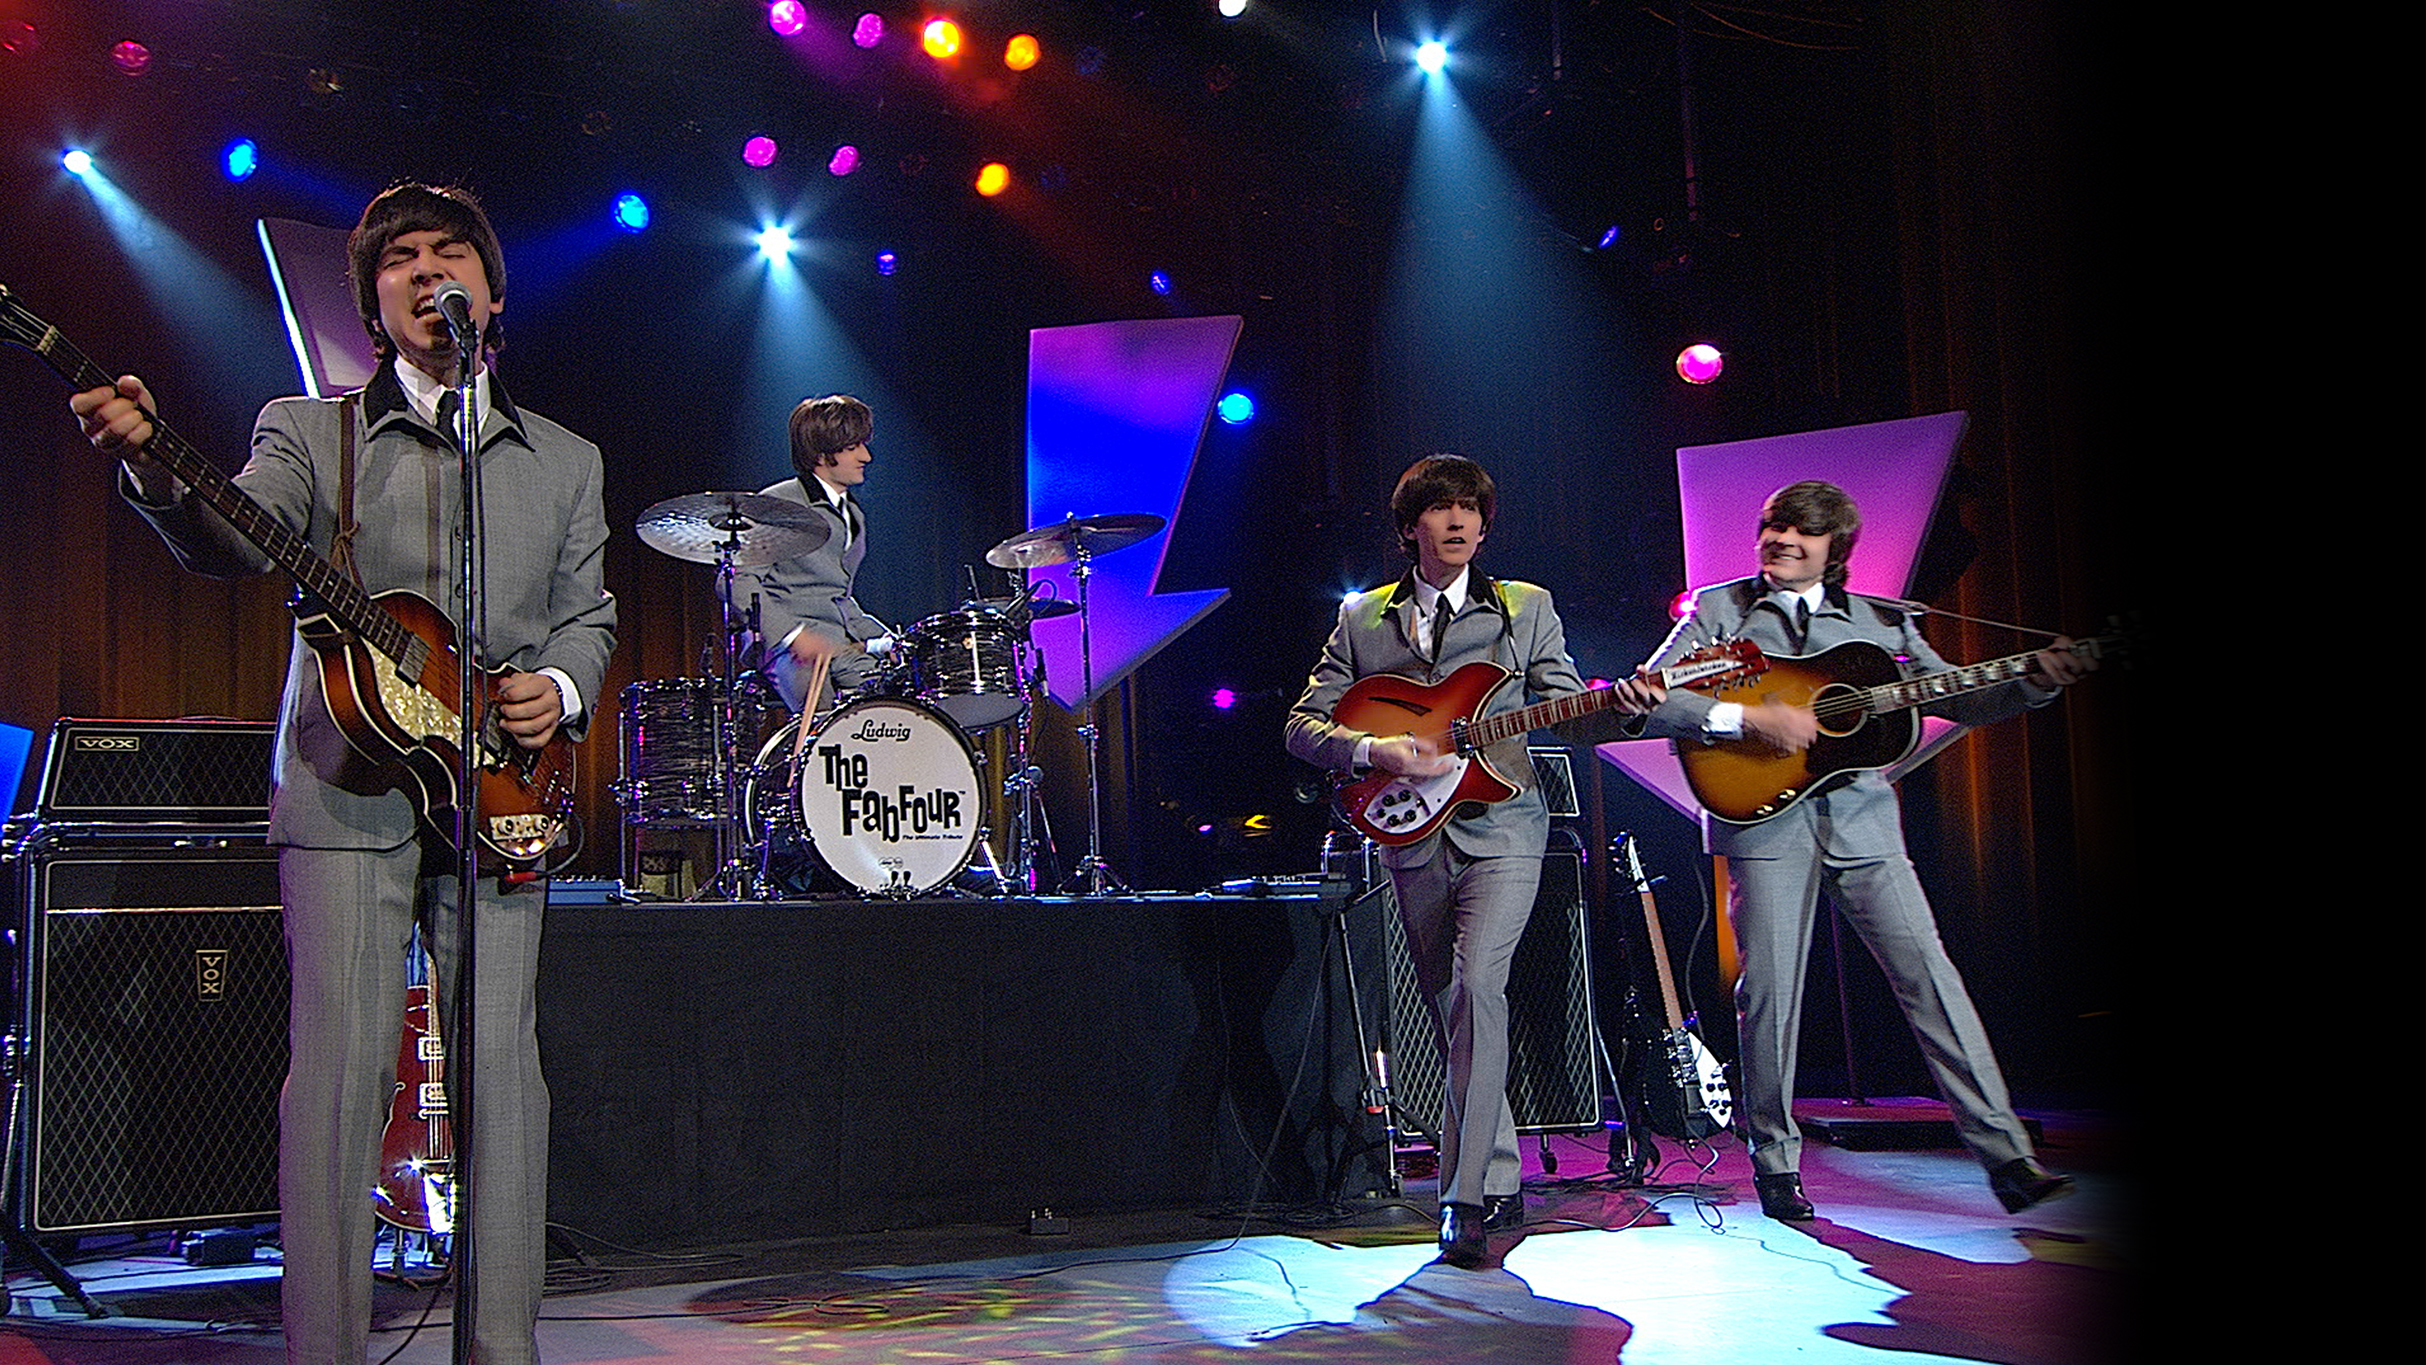 The Fab Four: USA Meets The Beatles!